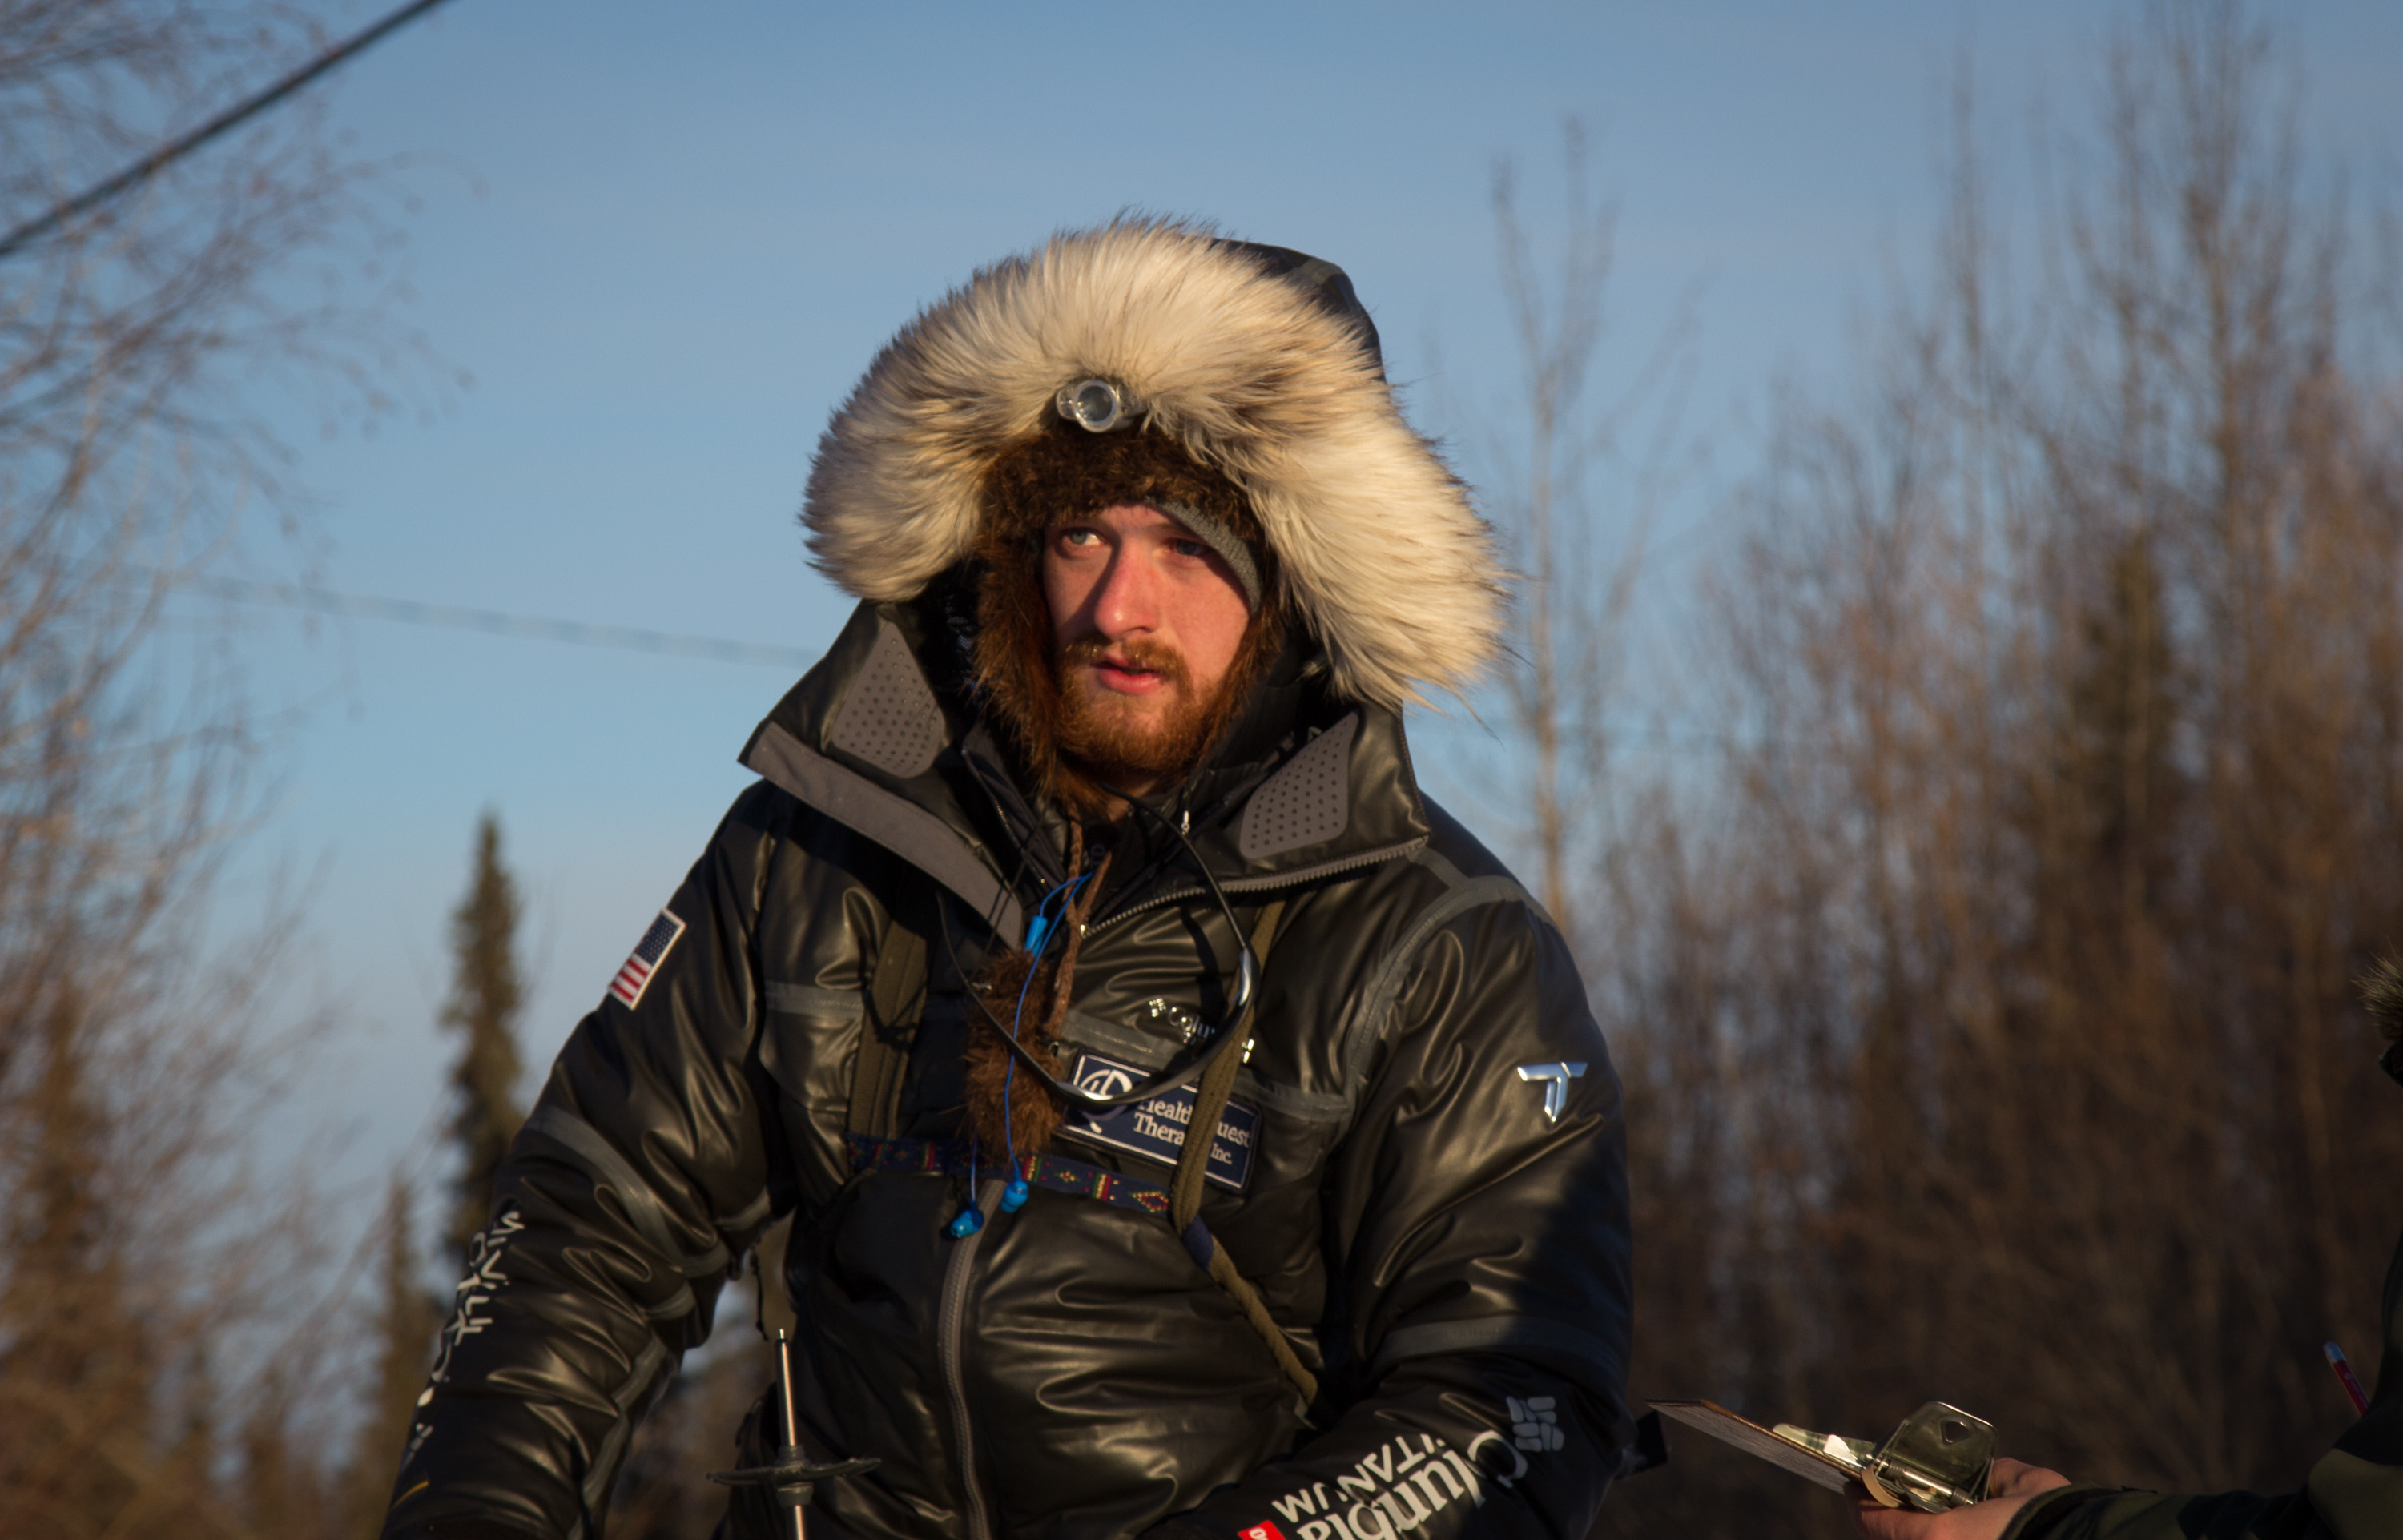 25-year-old Wade Marrs pulls in to Galena in the 2016 Iditarod. (Photo by Zach Hughes/KSKA)